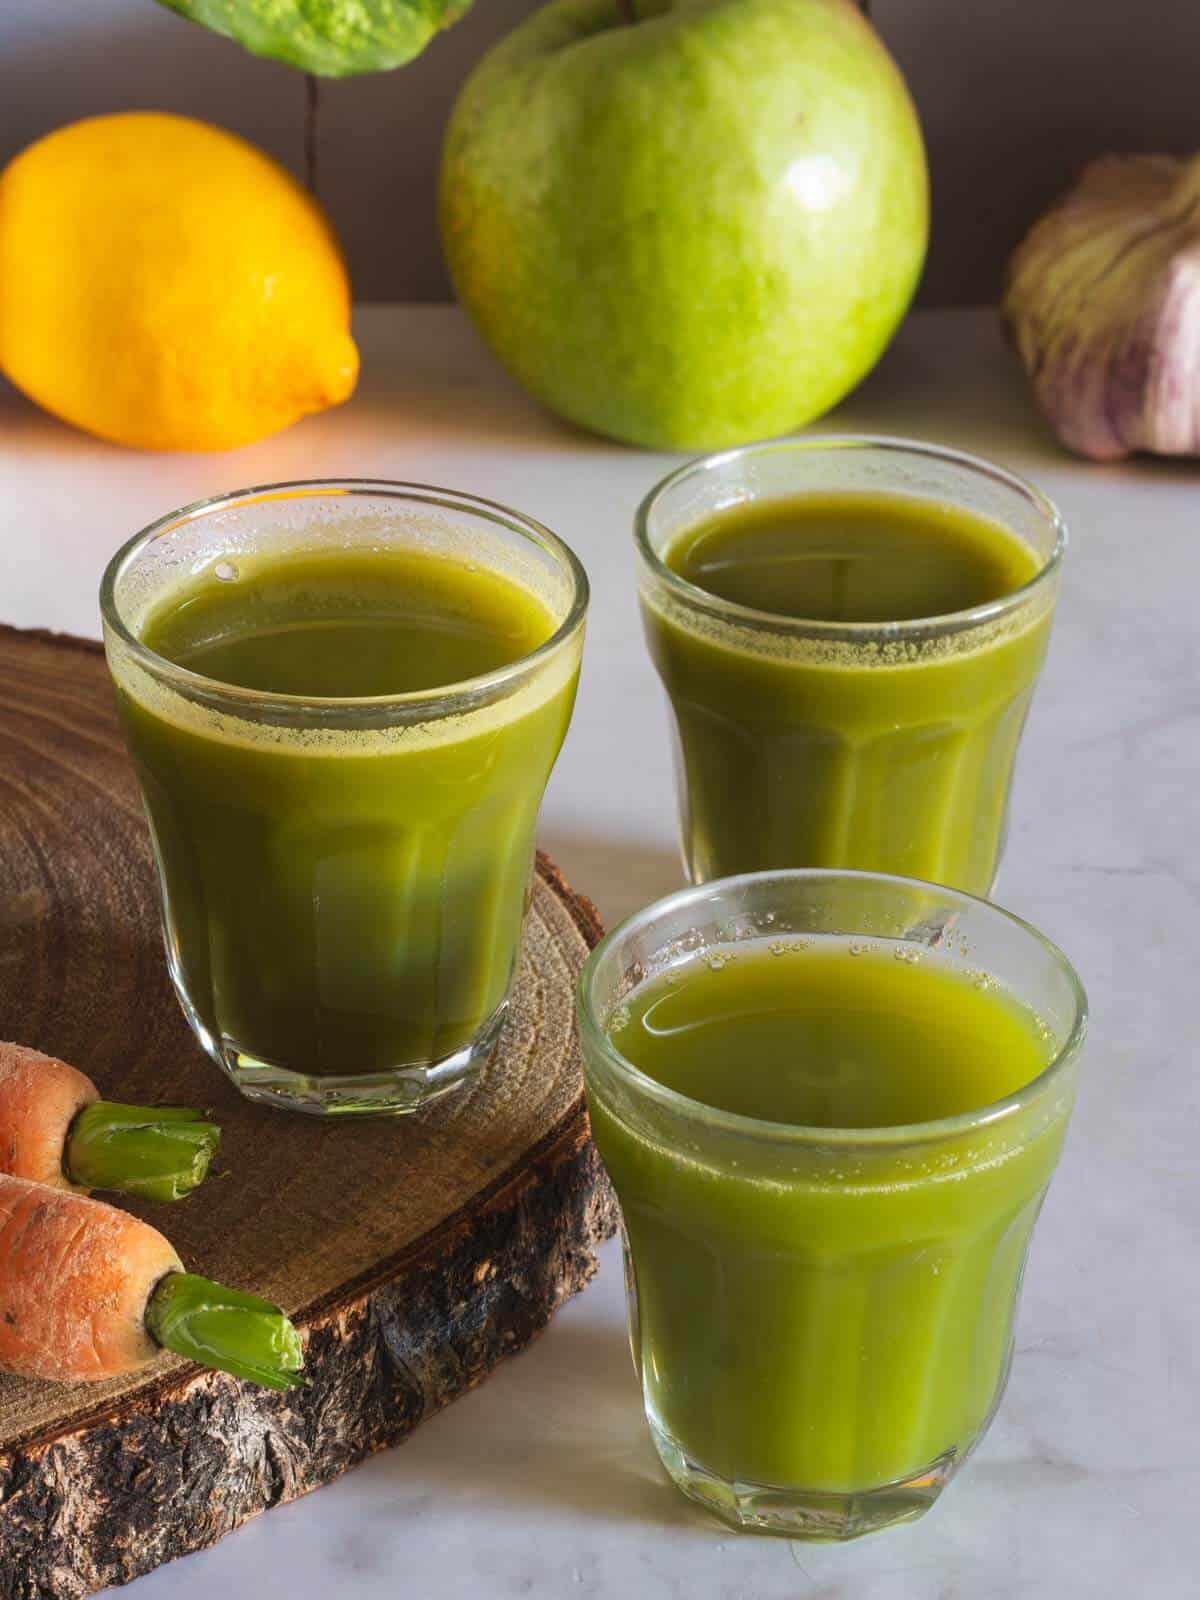 belly fat burning green juice.